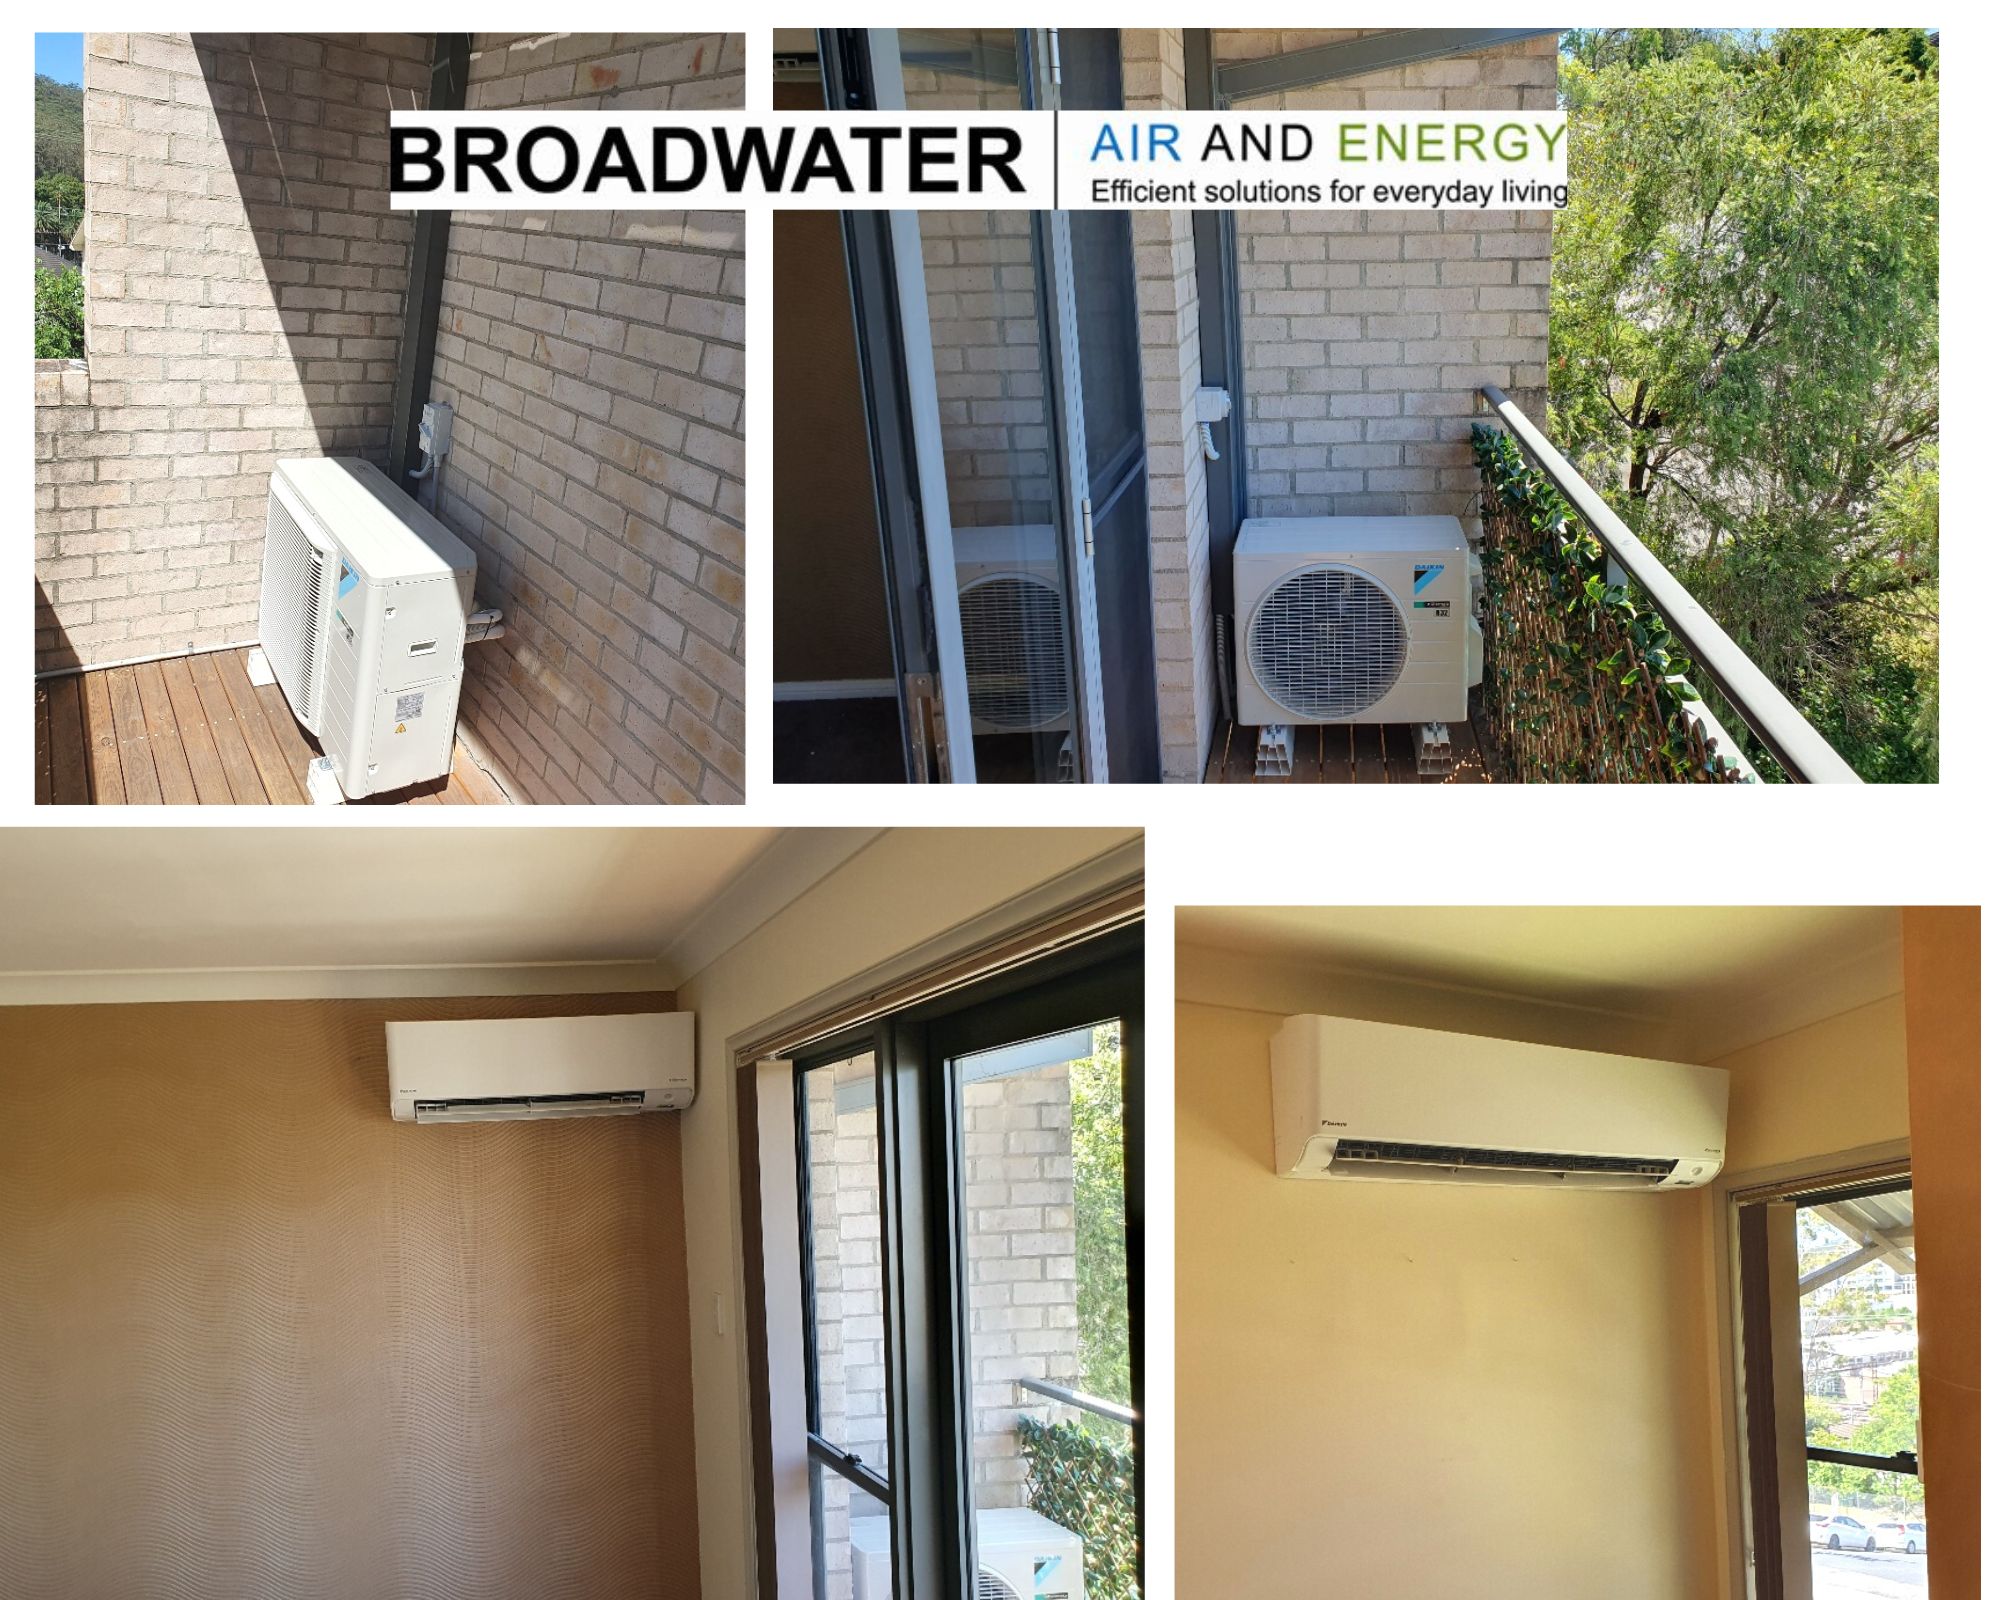 Broadwater Air and Energy (NSW) Pty Ltd West Gosford (02) 4322 6889